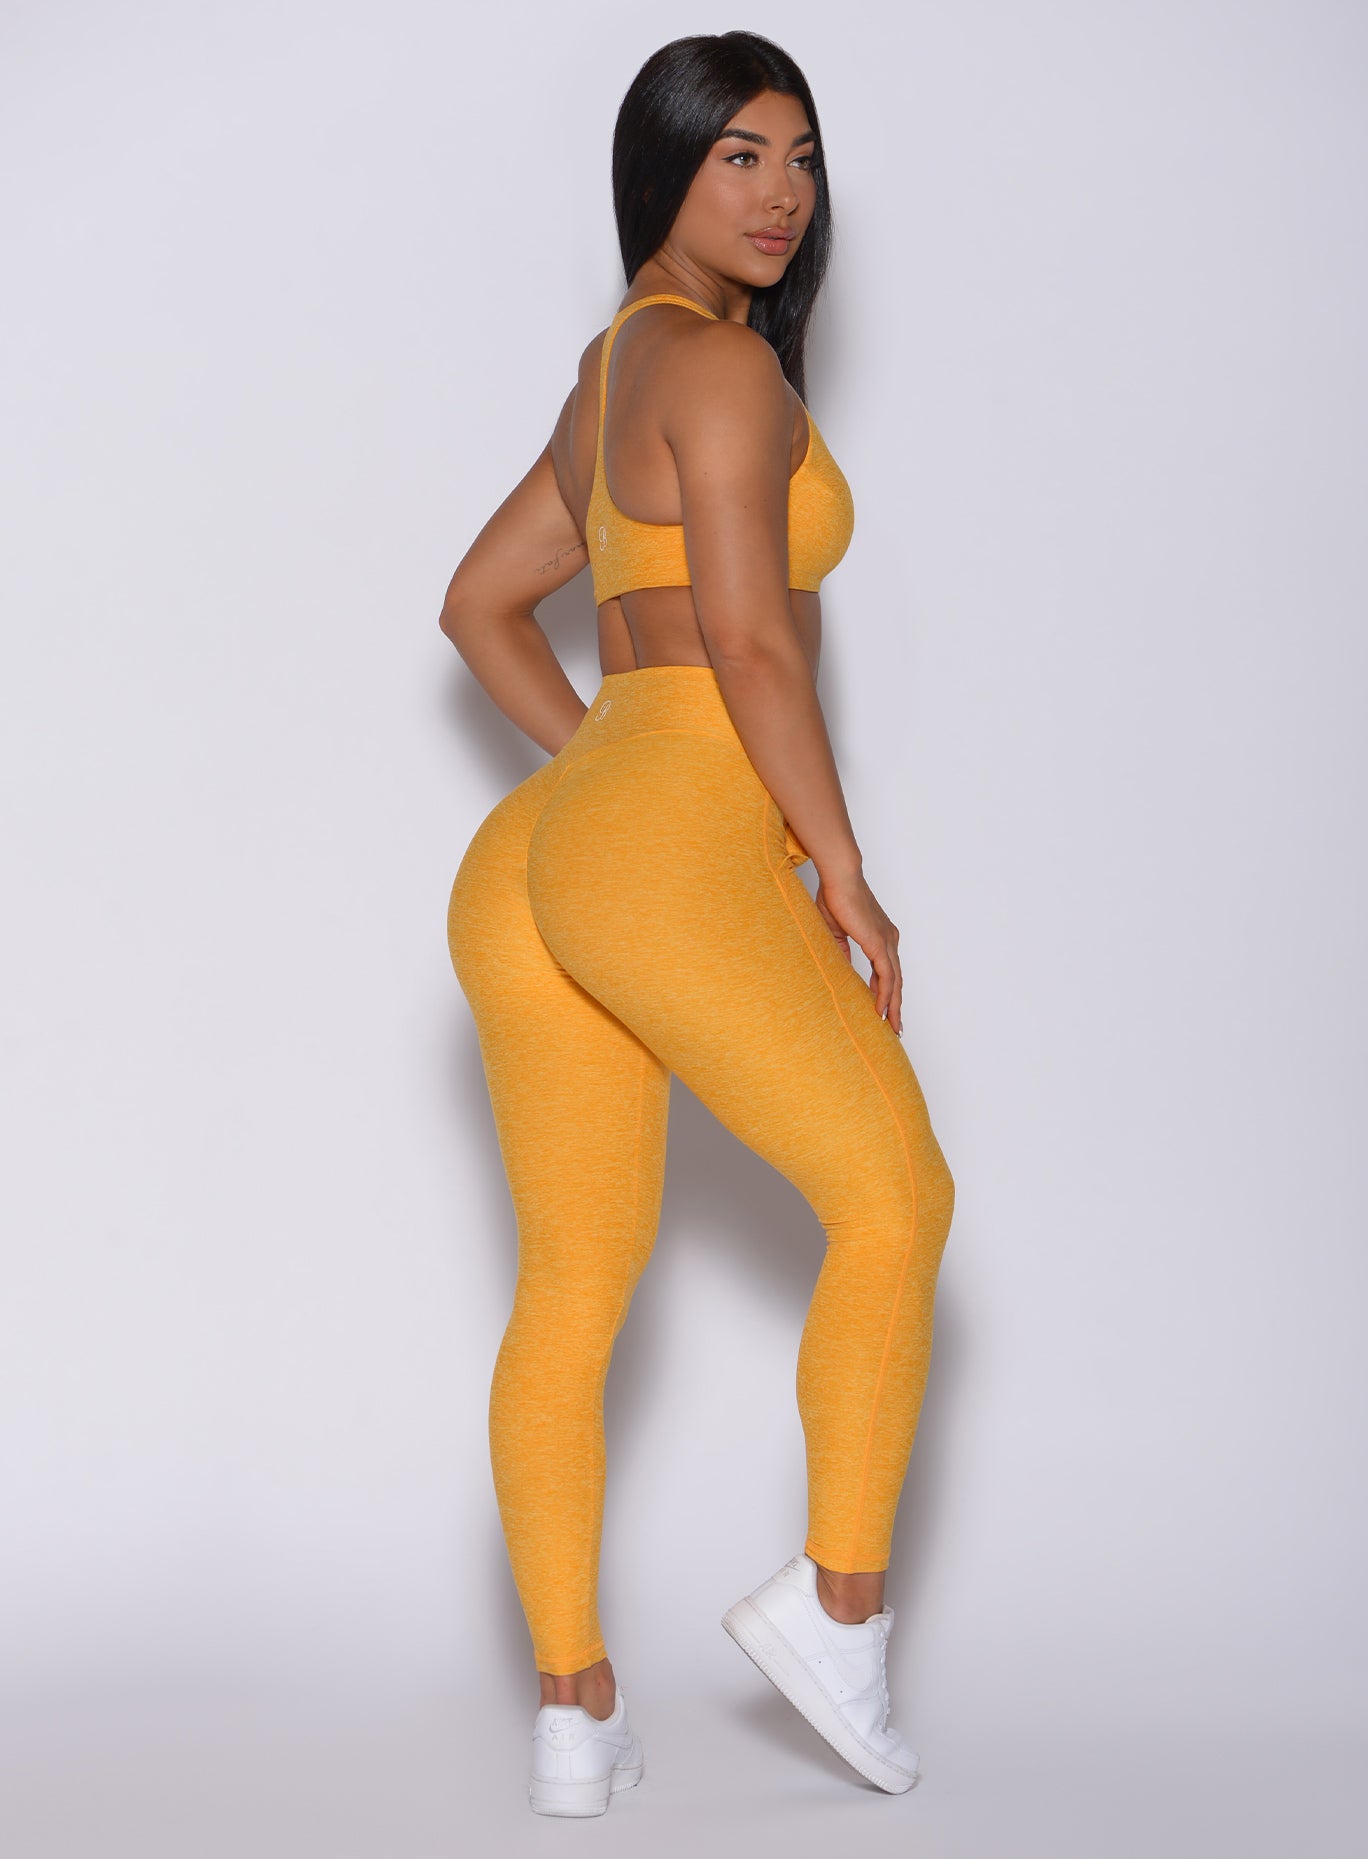 Right side profile view of a model in our V scrunch leggings in sinkissed color and a matching bra 